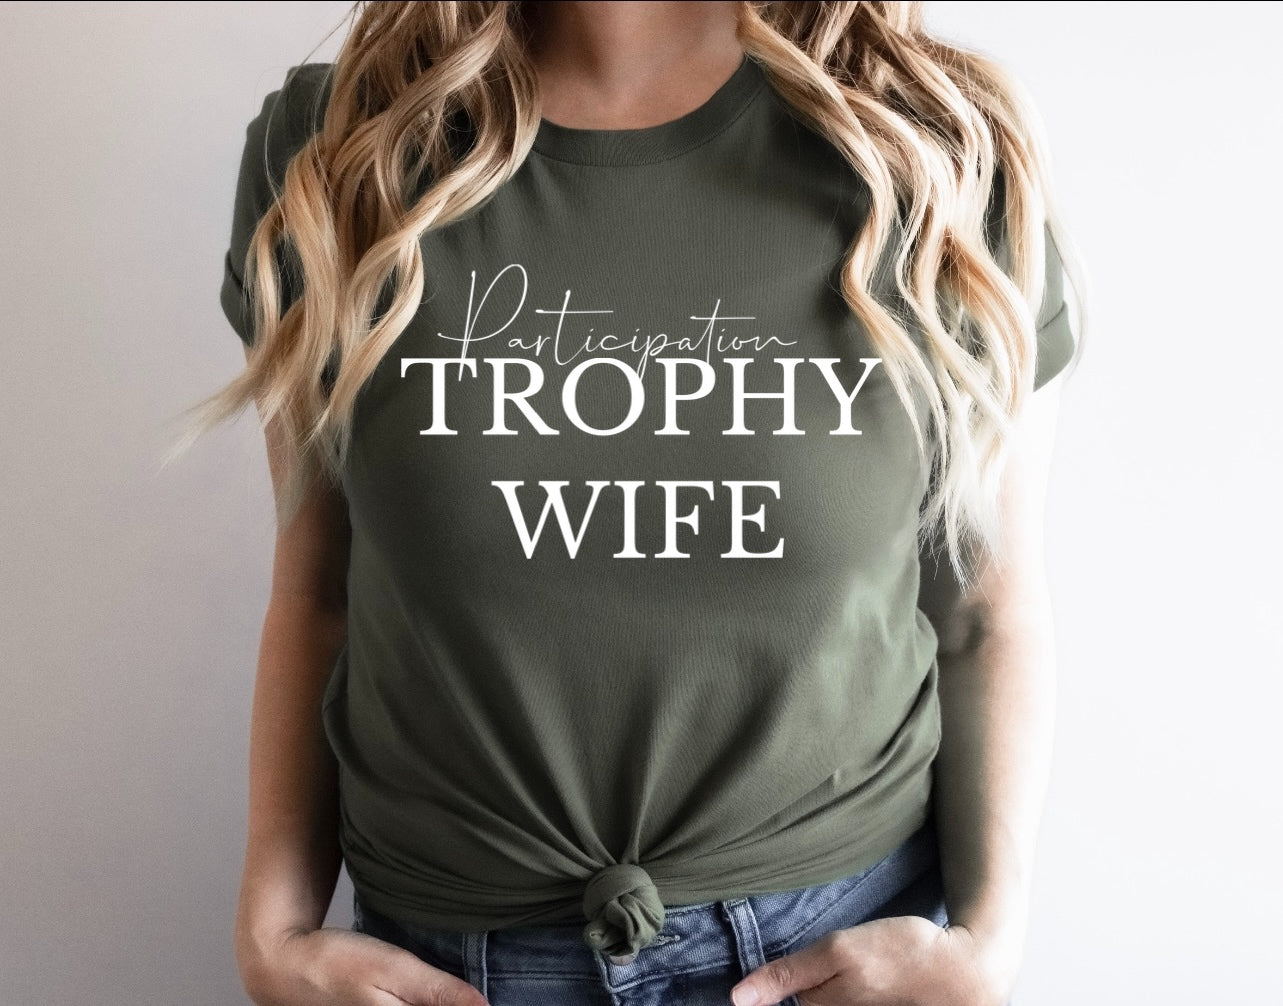 Participation trophy wife